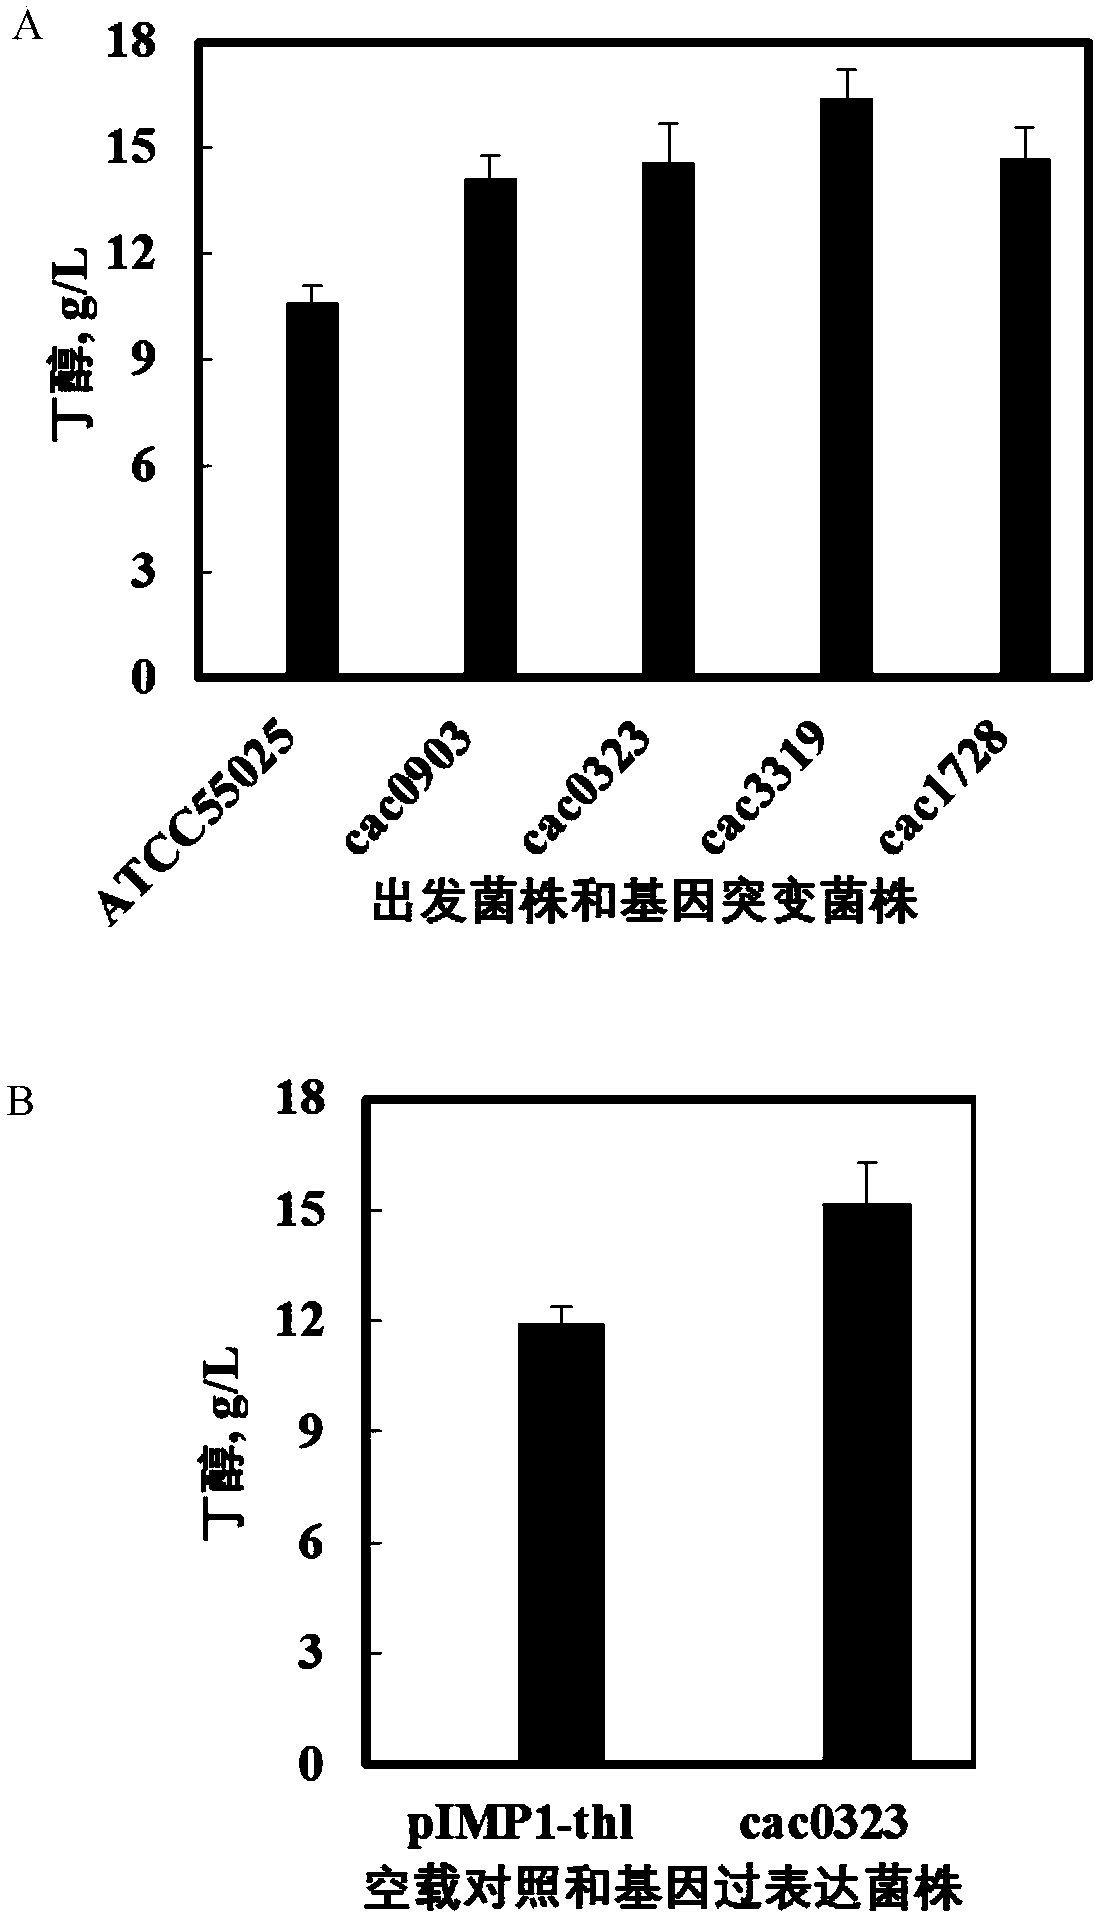 Clostridium modified by kinase gene with phosphorylation function and application of clostridium